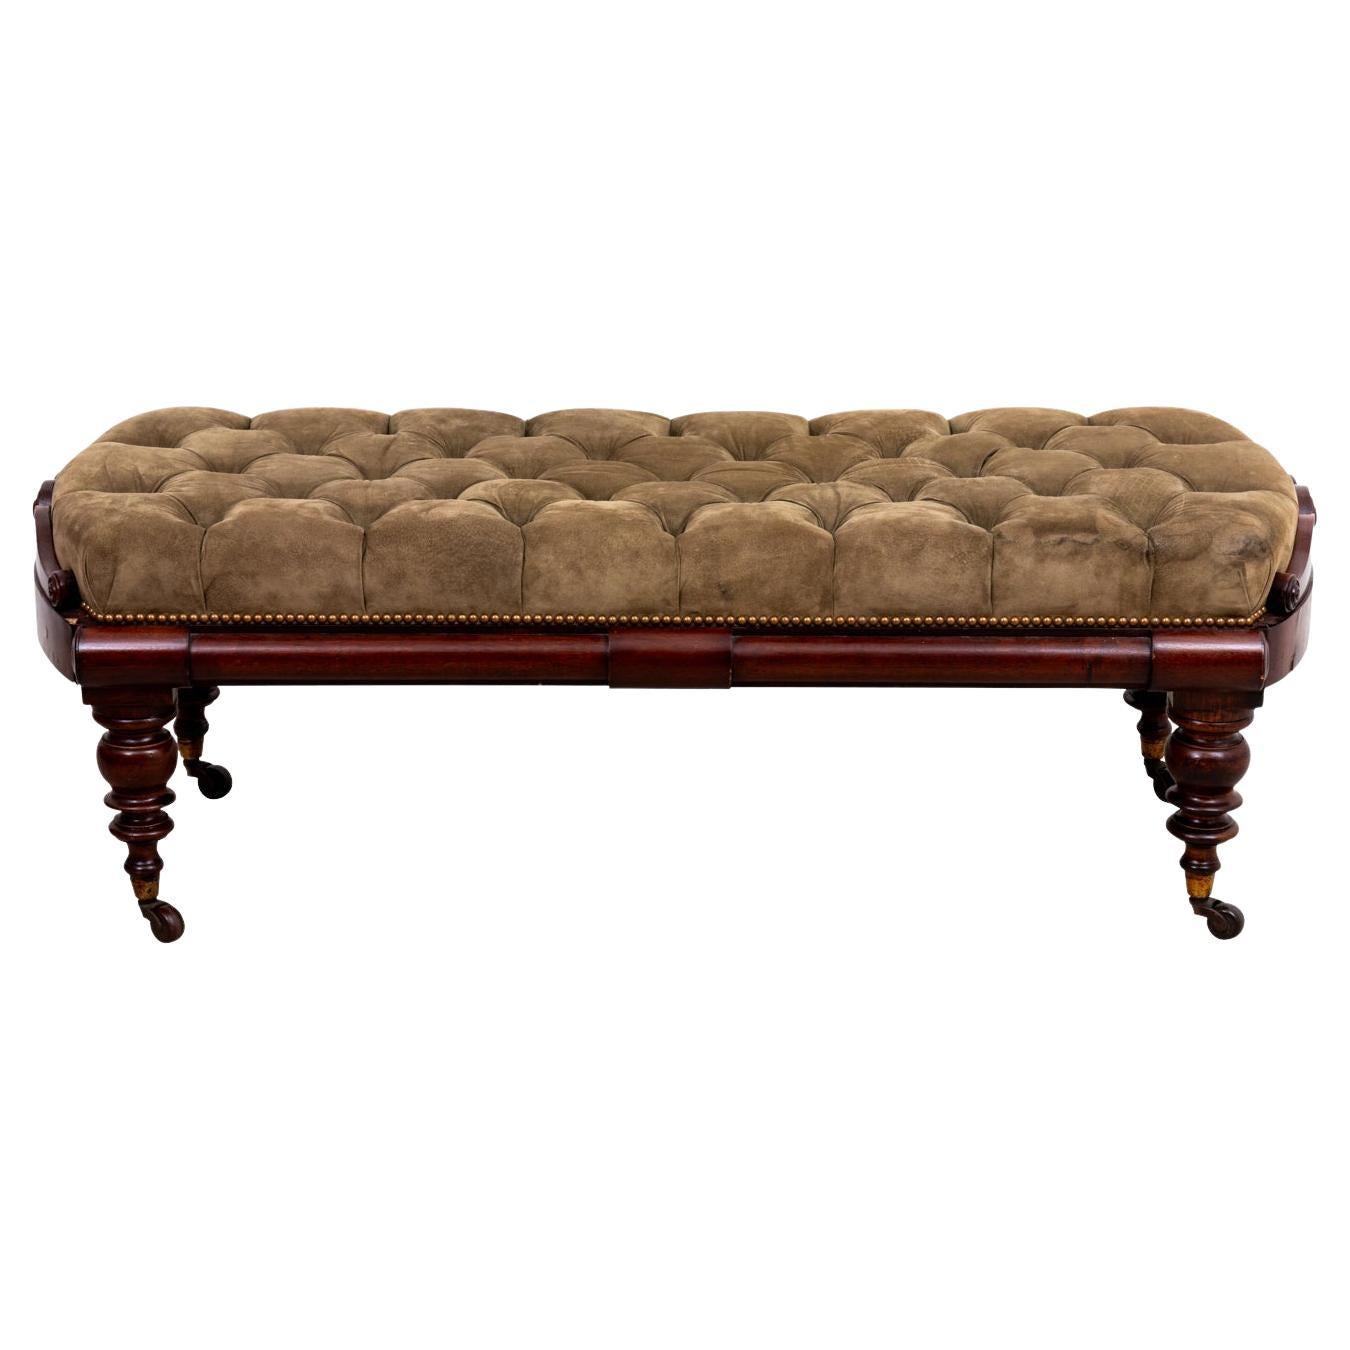 19th Century English Tufted Library Bench